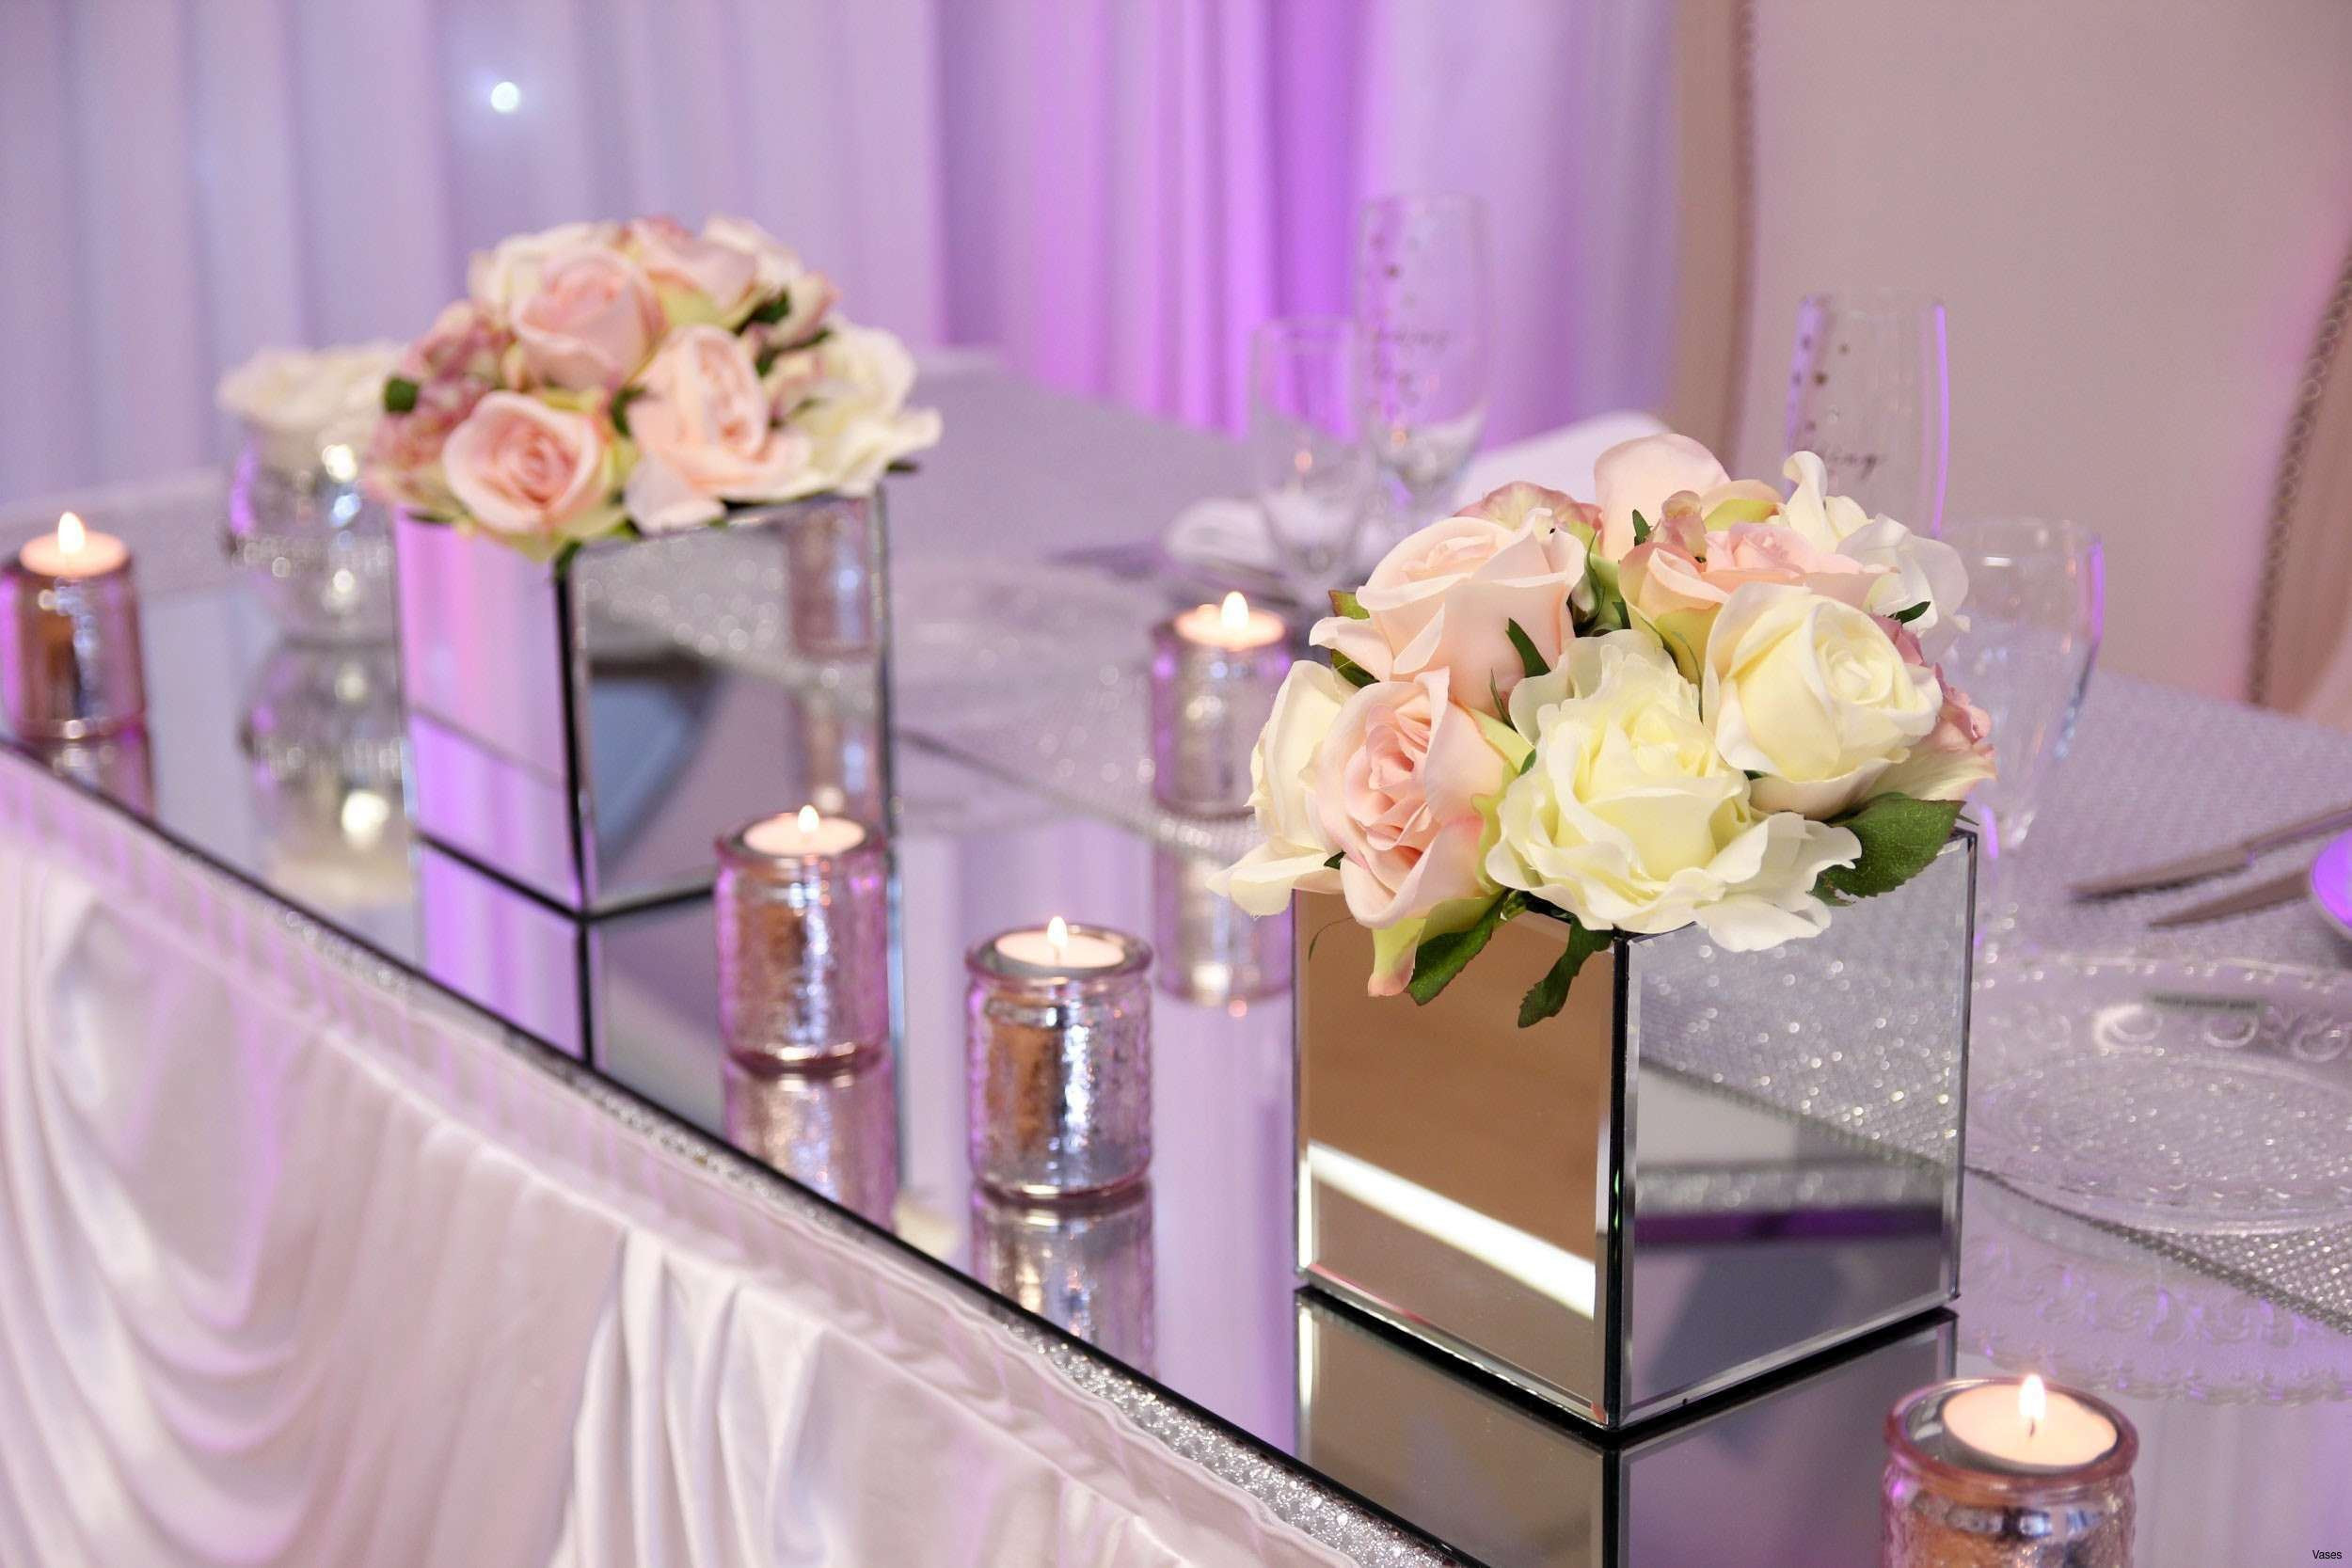 15 Lovely Vase Table Decorations 2024 free download vase table decorations of mirrored square vase 3h vases mirror table decorationi 0d weddings with mirrored square vase 3h vases mirror table decorationi 0d weddings ideas of halloween weddin